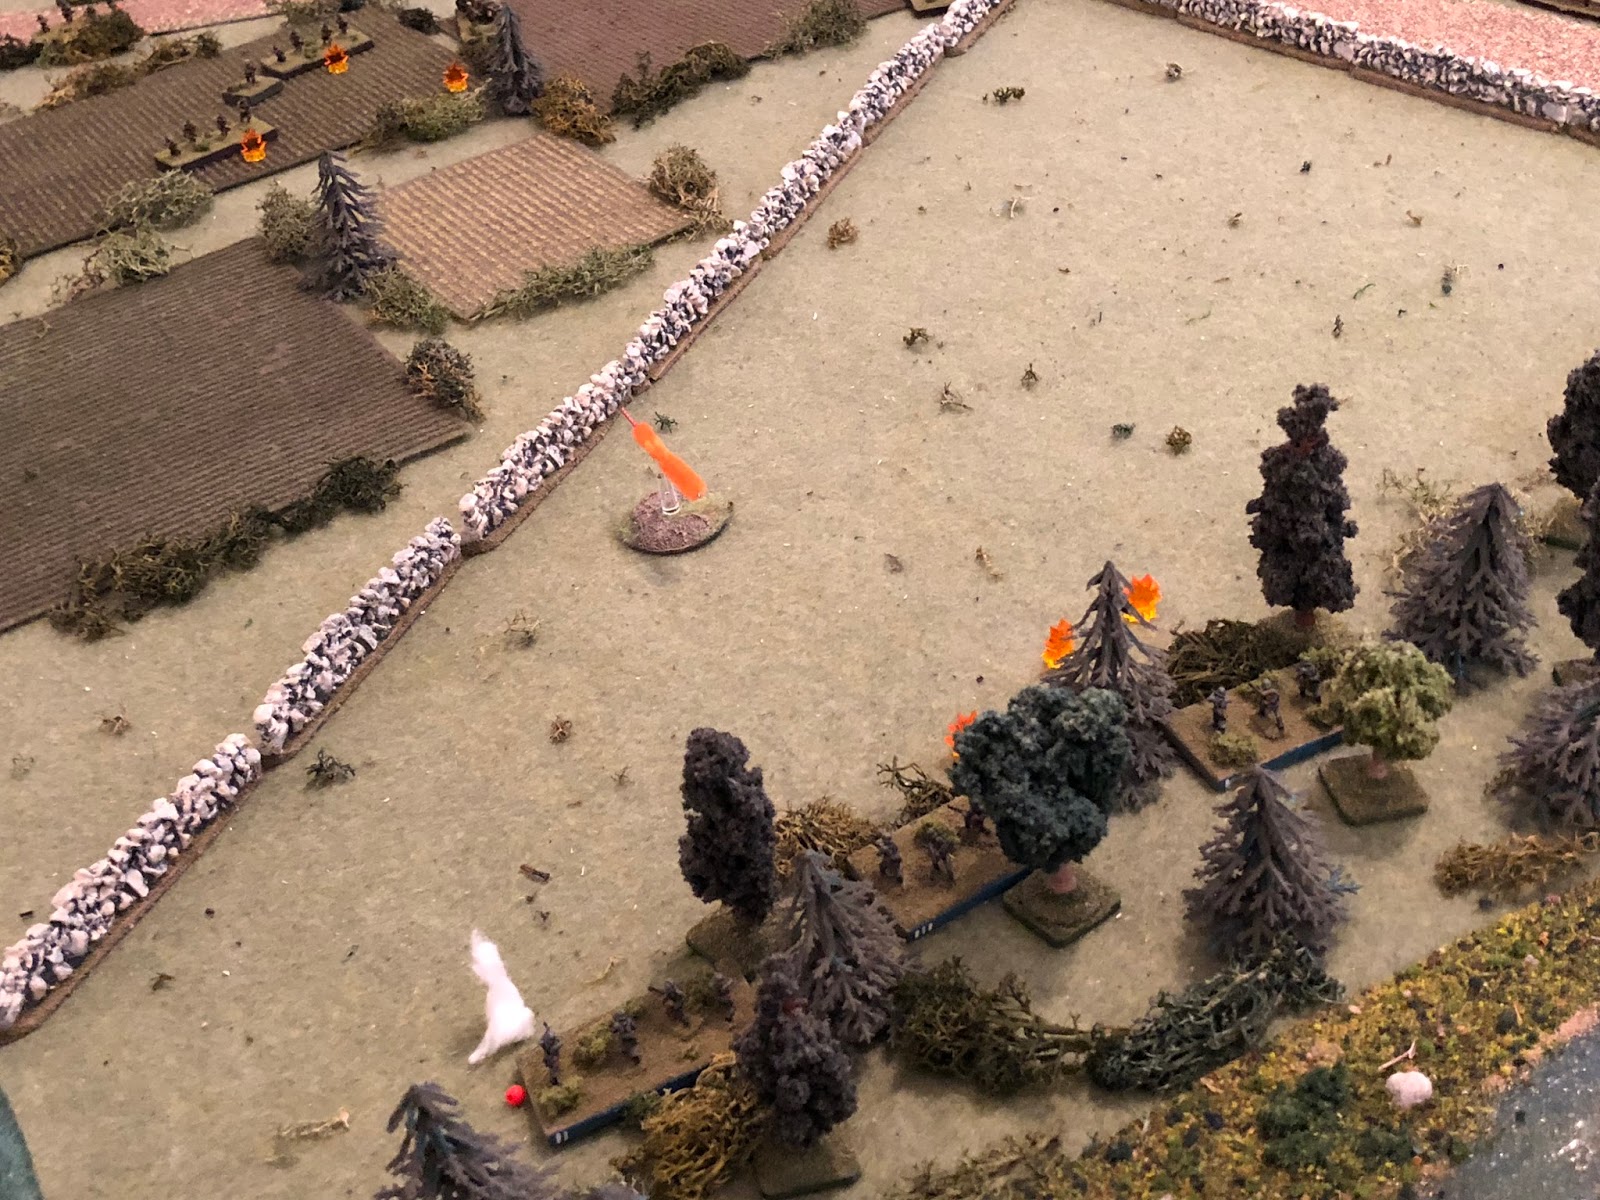  And as that is happening, the German Motorcycle Platoon (bottom centre) ups their fire on the French 1st Platoon (top left).&nbsp; Well, 1st and 2nd Squads, anyway; Cpl Wilhelm's 3rd Squad red bead at bottom left) tries to rally). 